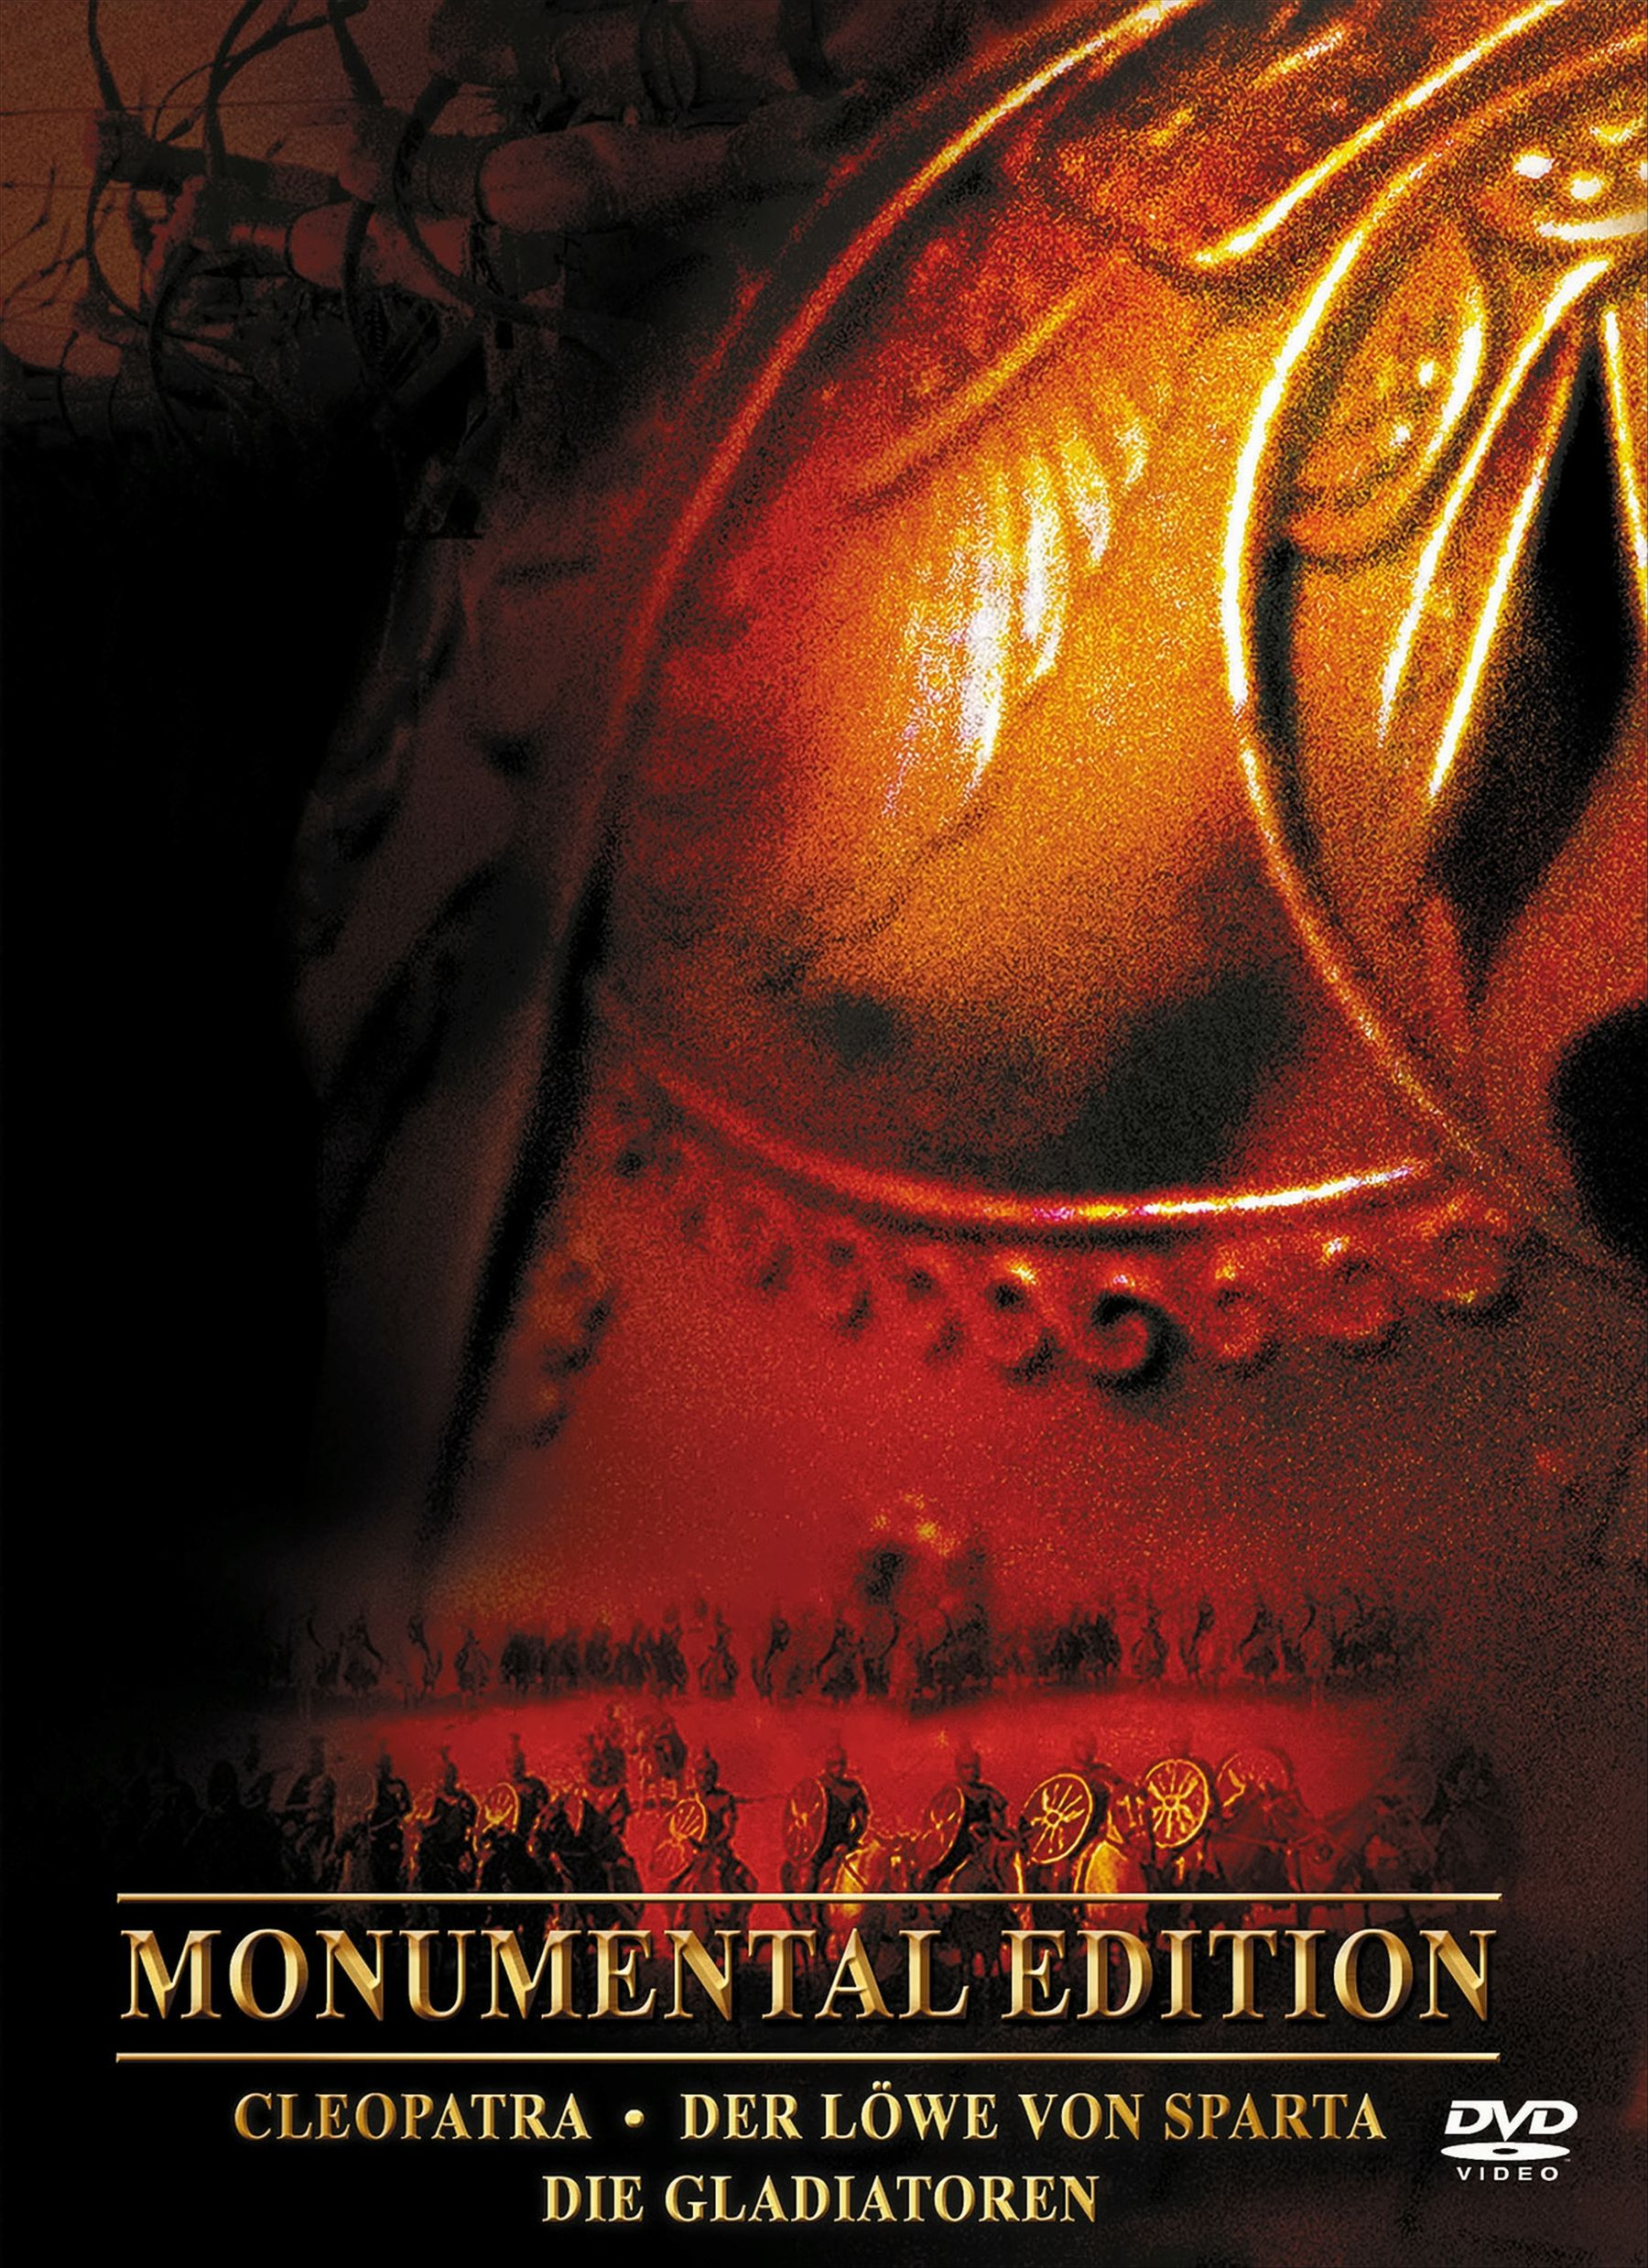 Monumental Edition (4 DVD DVDs)